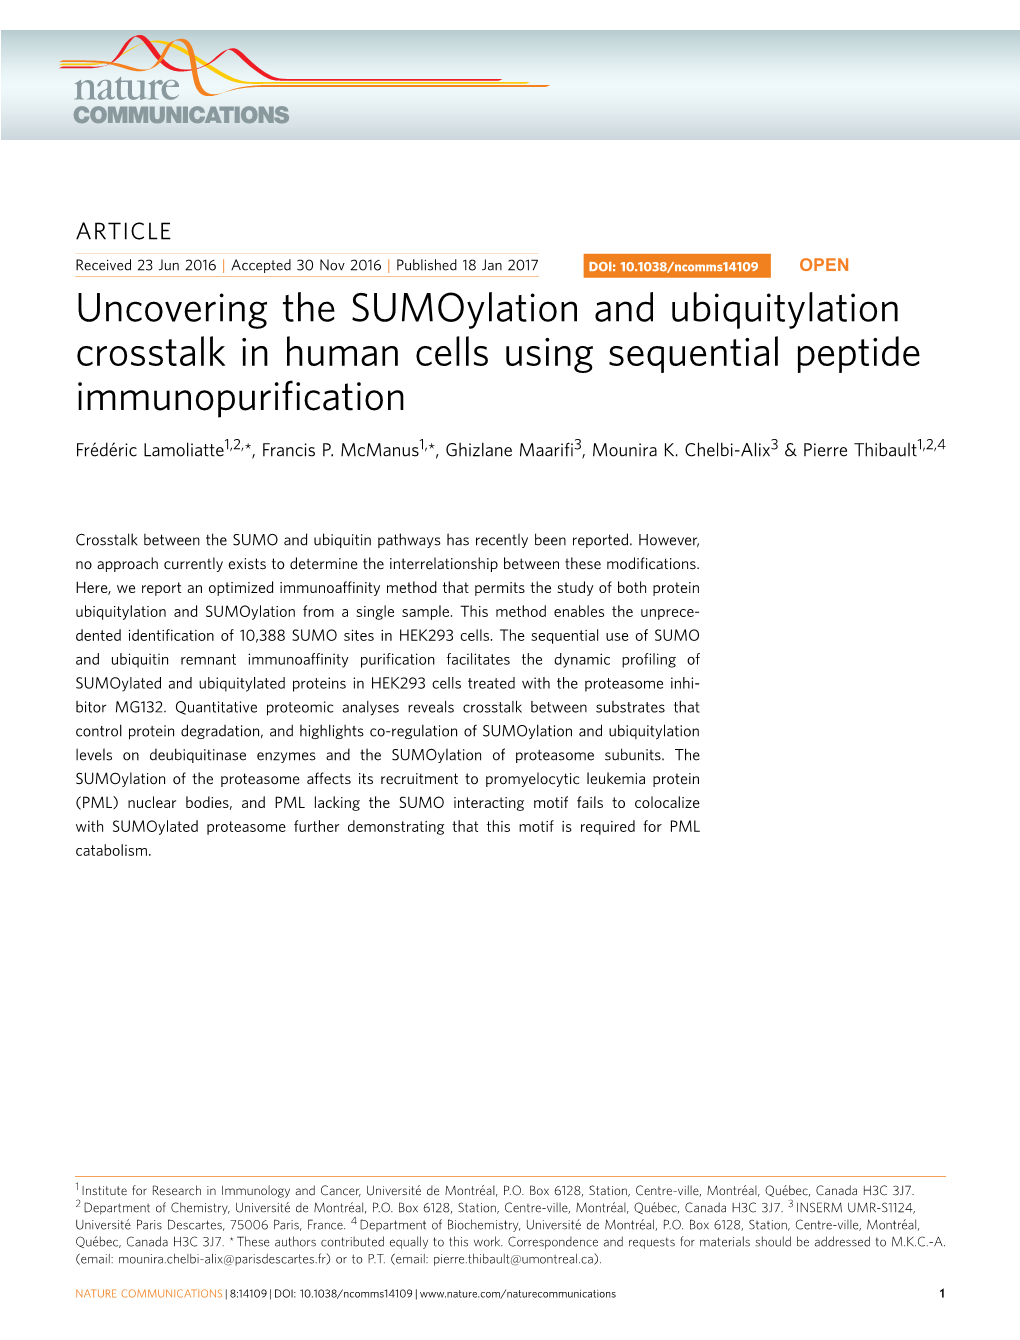 Uncovering the Sumoylation and Ubiquitylation Crosstalk in Human Cells Using Sequential Peptide Immunopuriﬁcation